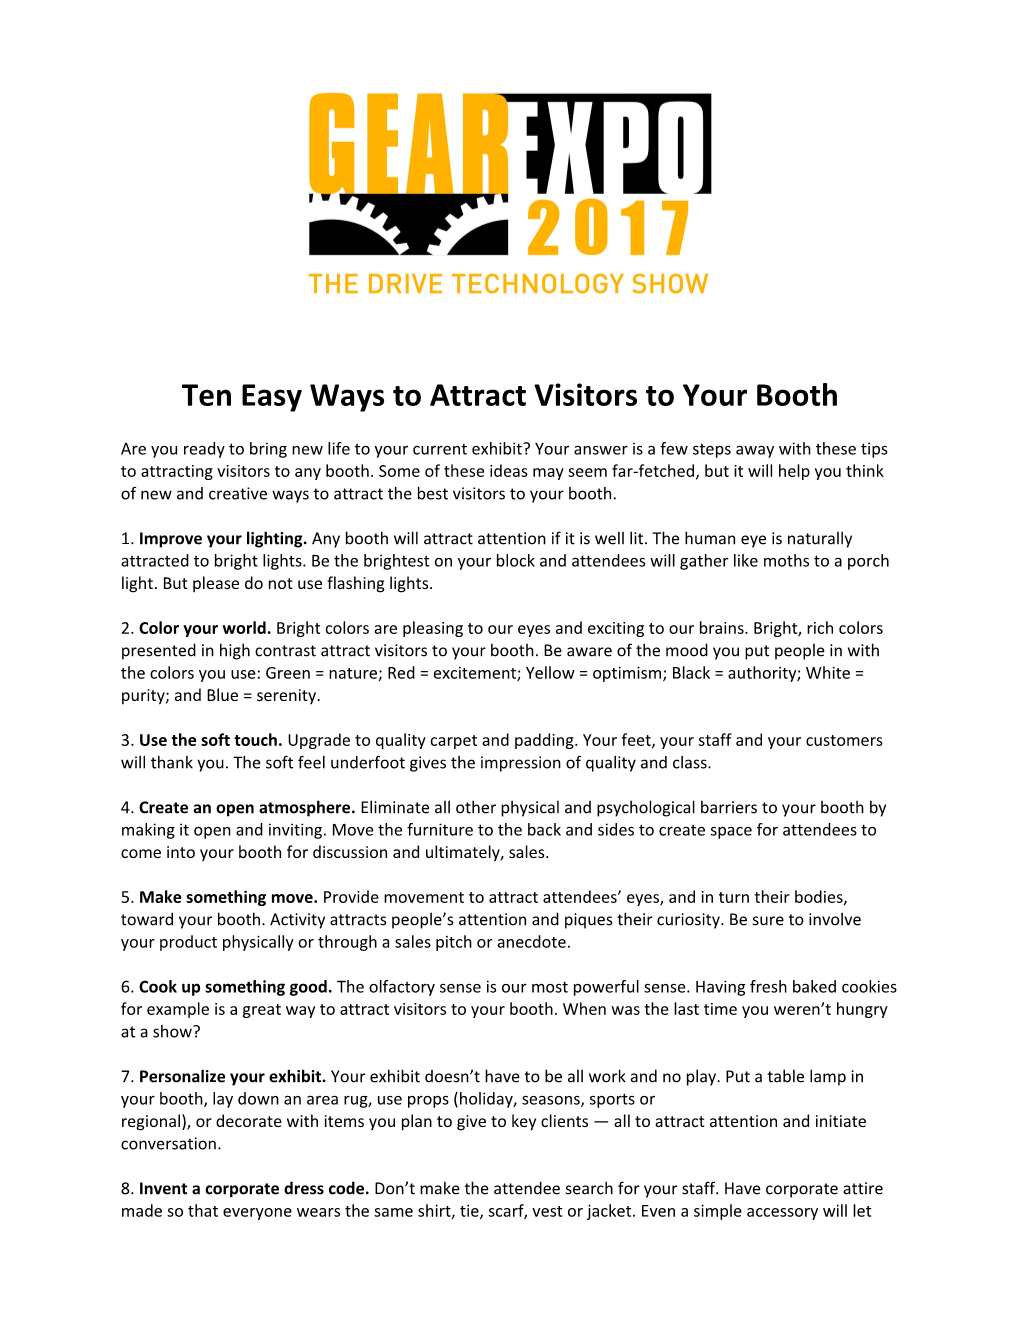 Ten Easy Ways to Attract Visitors to Your Booth